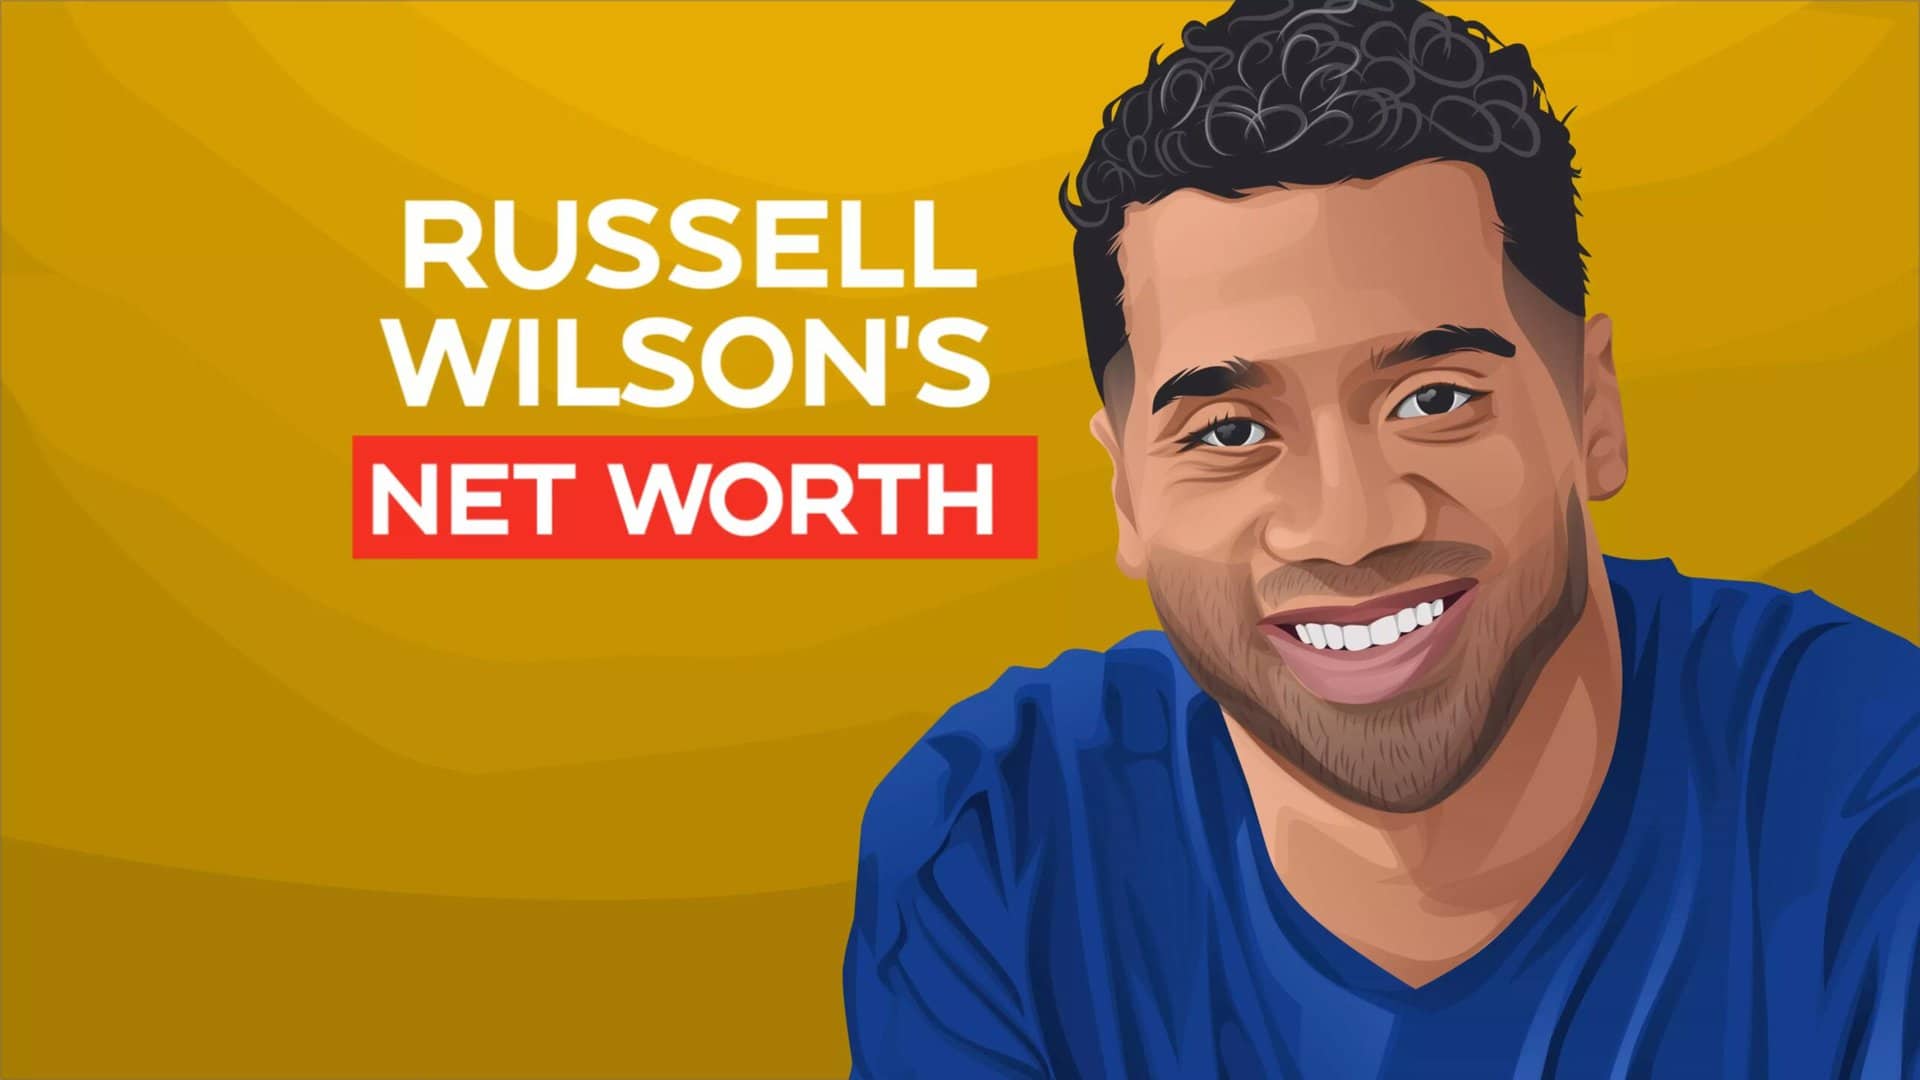 Russell Wilson's Net Worth and Story